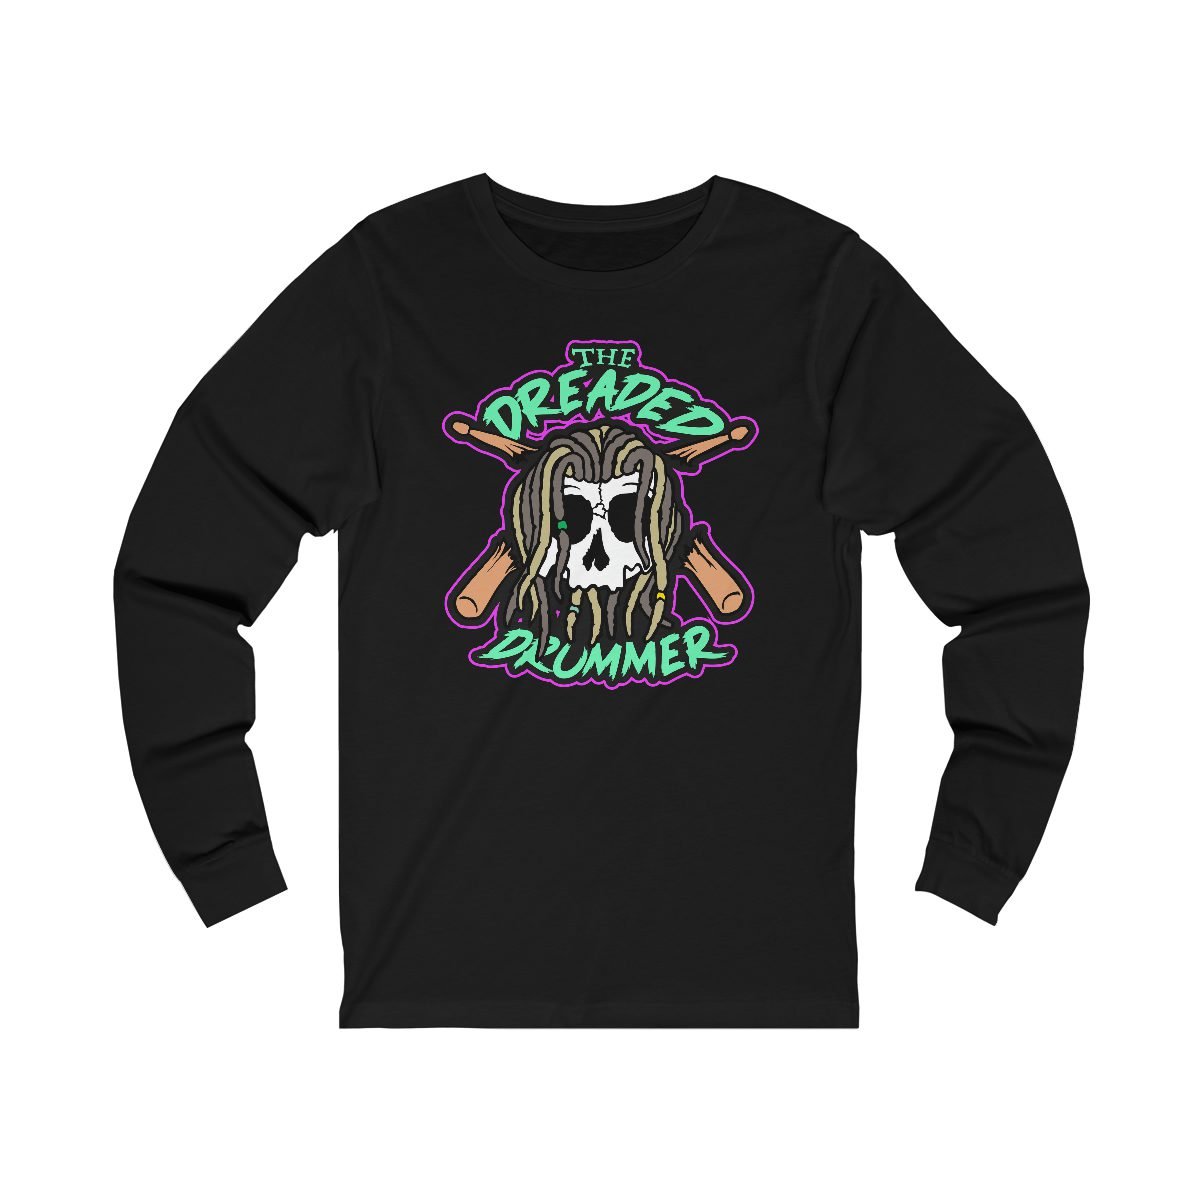 The Dreaded Drummer Green and Purple Version Long Sleeve Tshirt